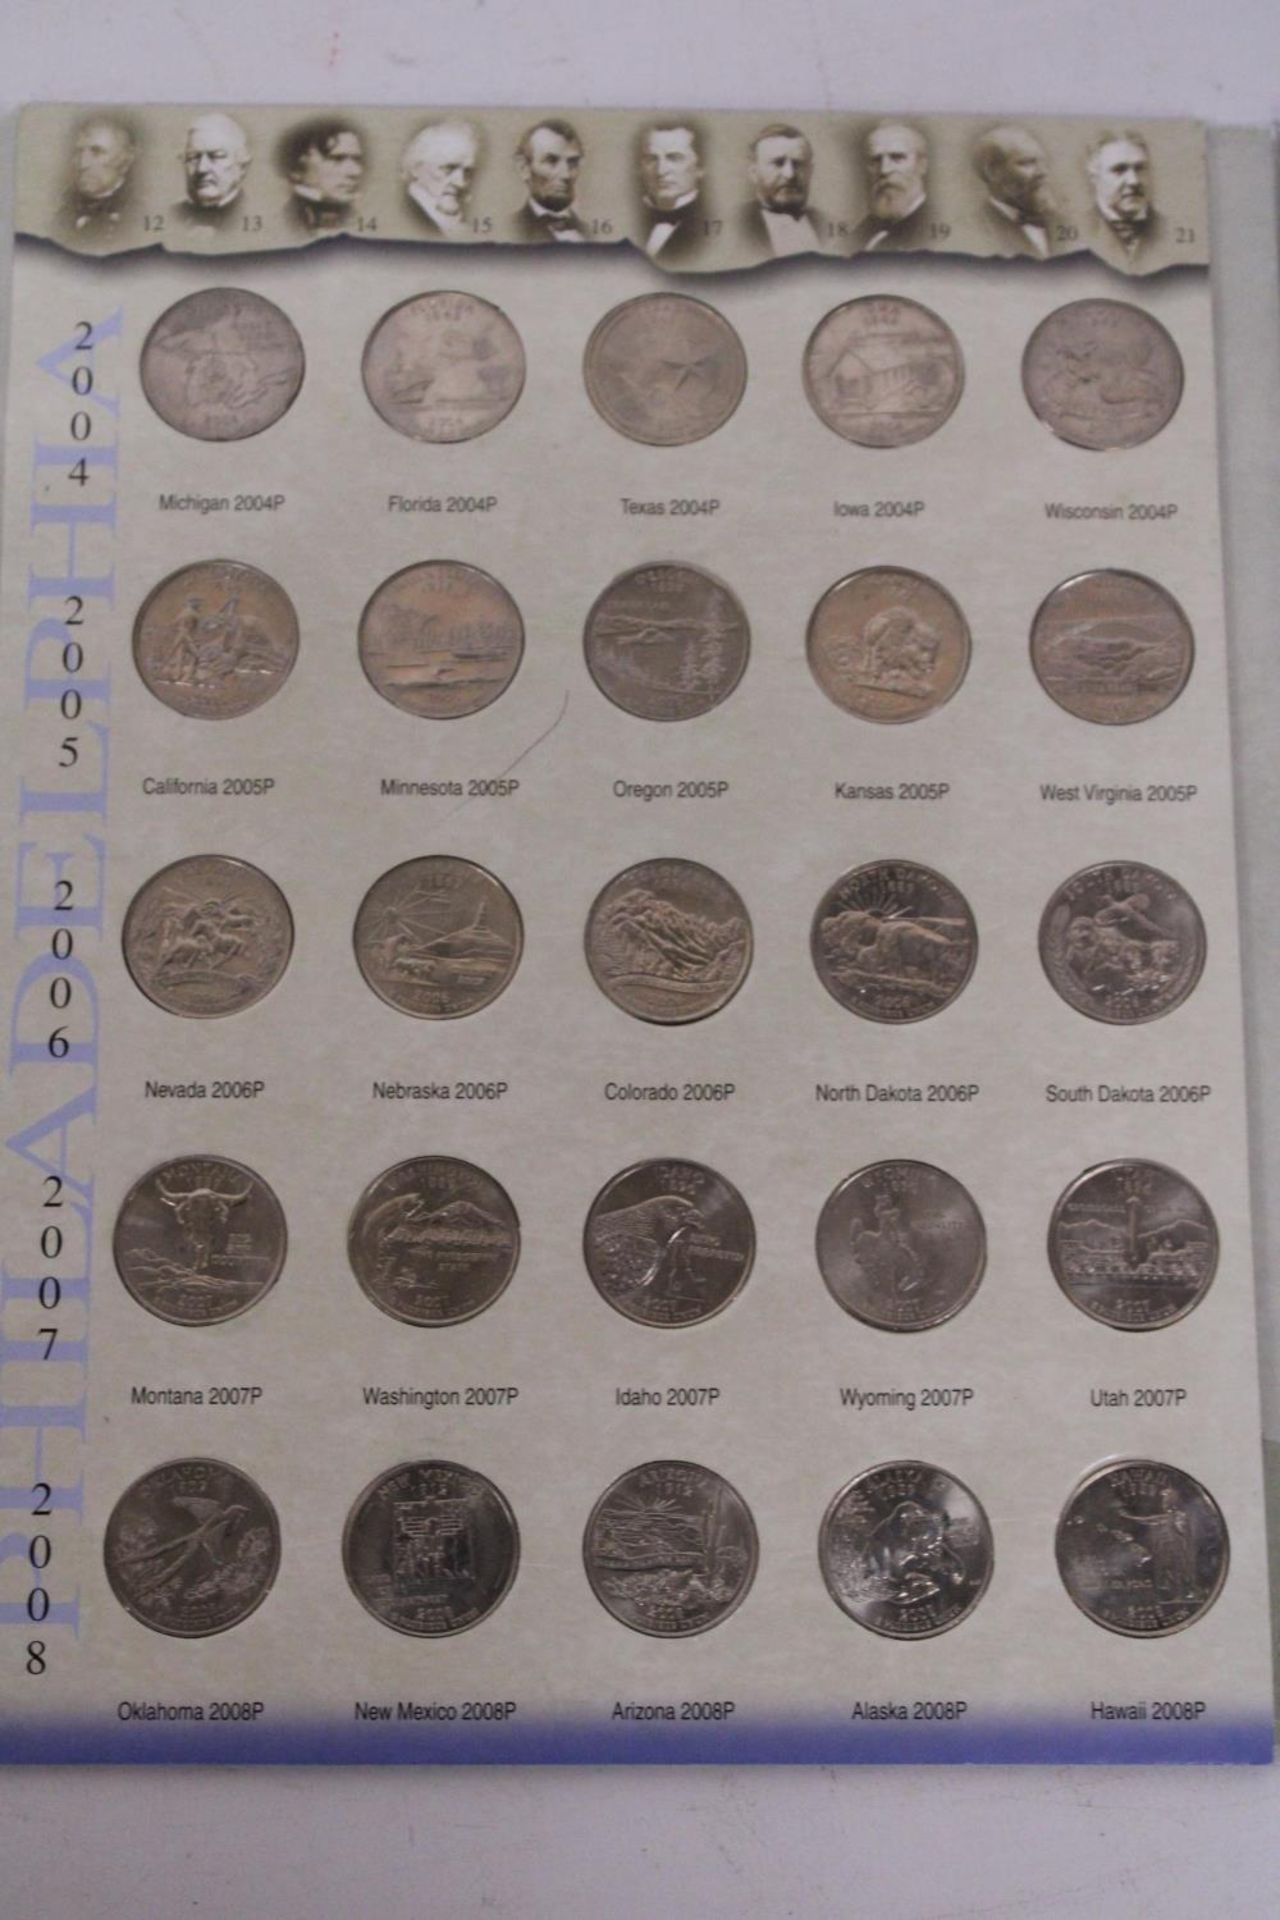 USA , STATE SERIES QUARTERS , COMPLETE 100 COIN SET , 1999-2008 , PHILADELPHIA AND DENVER MINT - Image 4 of 5